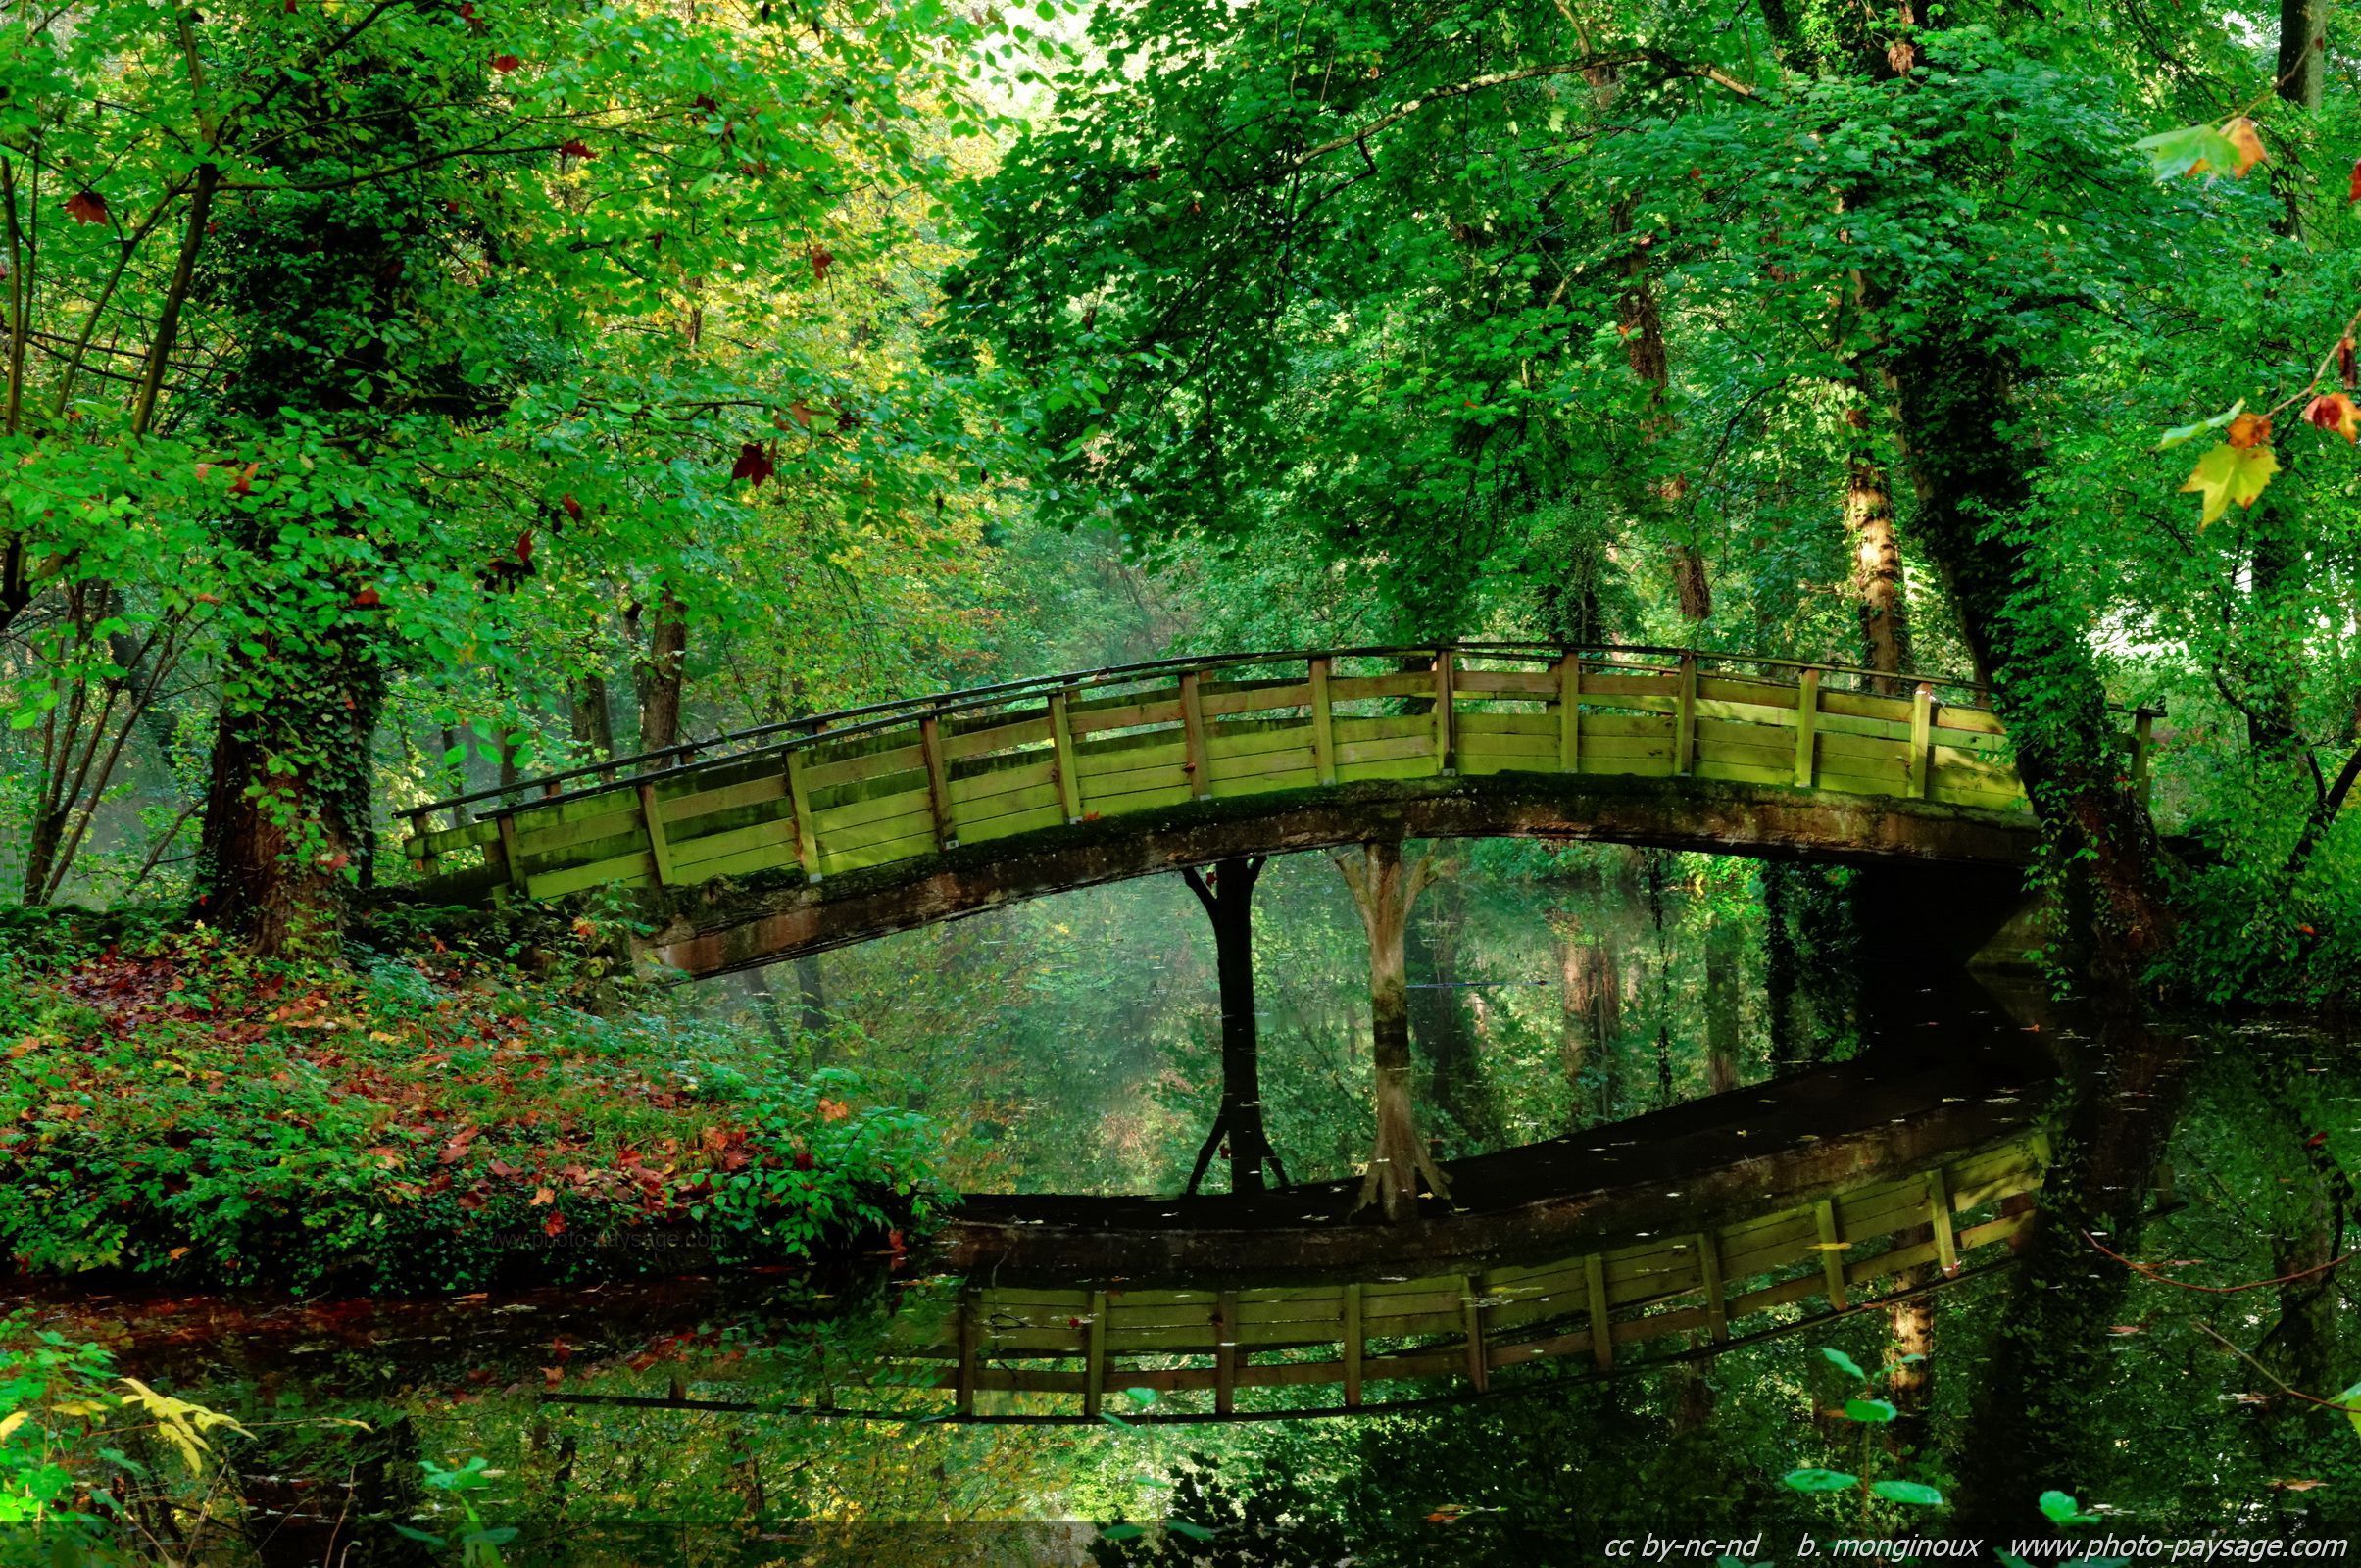 A footbridge reflecting in water in the forest / Other woods